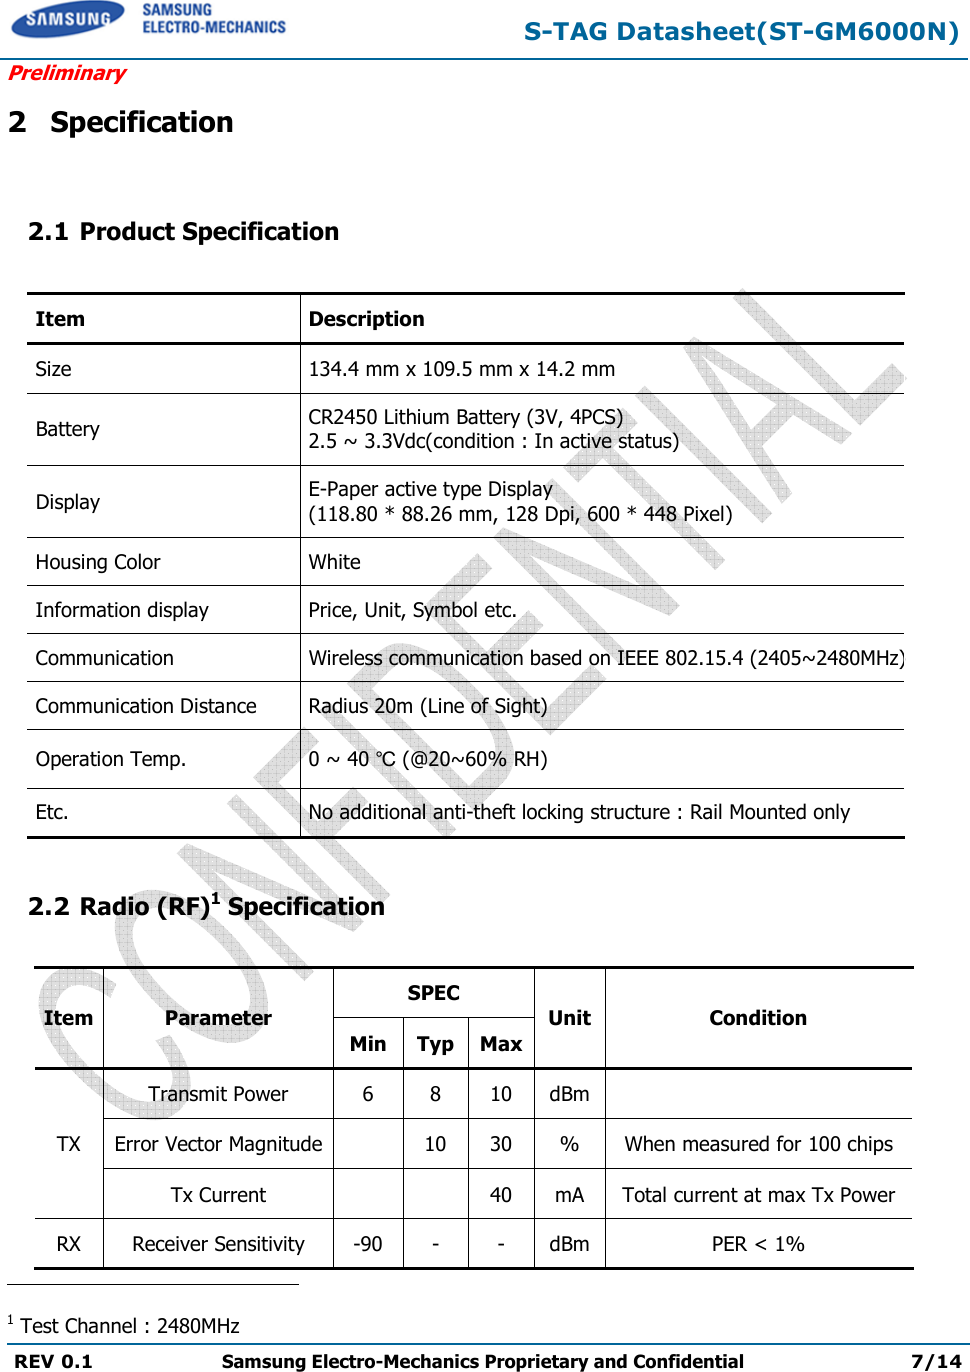 S-TAG Datasheet(ST-GM6000N) Preliminary REV 0.1  Samsung Electro-Mechanics Proprietary and Confidential 7/14 2 Specification 2.1 Product Specification Item Description Size 134.4 mm x 109.5 mm x 14.2 mm Battery CR2450 Lithium Battery (3V, 4PCS) 2.5 ~ 3.3Vdc(condition : In active status) Display E-Paper active type Display (118.80 * 88.26 mm, 128 Dpi, 600 * 448 Pixel) Housing Color White Information display Price, Unit, Symbol etc. Communication Wireless communication based on IEEE 802.15.4 (2405~2480MHz) Communication Distance Radius 20m (Line of Sight) Operation Temp.  0 ~ 40 ℃ (@20~60% RH)Etc. No additional anti-theft locking structure : Rail Mounted only 2.2 Radio (RF)1 Specification Item Parameter SPEC Unit Condition Min Typ Max TX Transmit Power 6 8 10 dBm Error Vector Magnitude 10 30 % When measured for 100 chips Tx Current 40 mA Total current at max Tx Power RX Receiver Sensitivity -90 - - dBm PER &lt; 1% 1 Test Channel : 2480MHz 